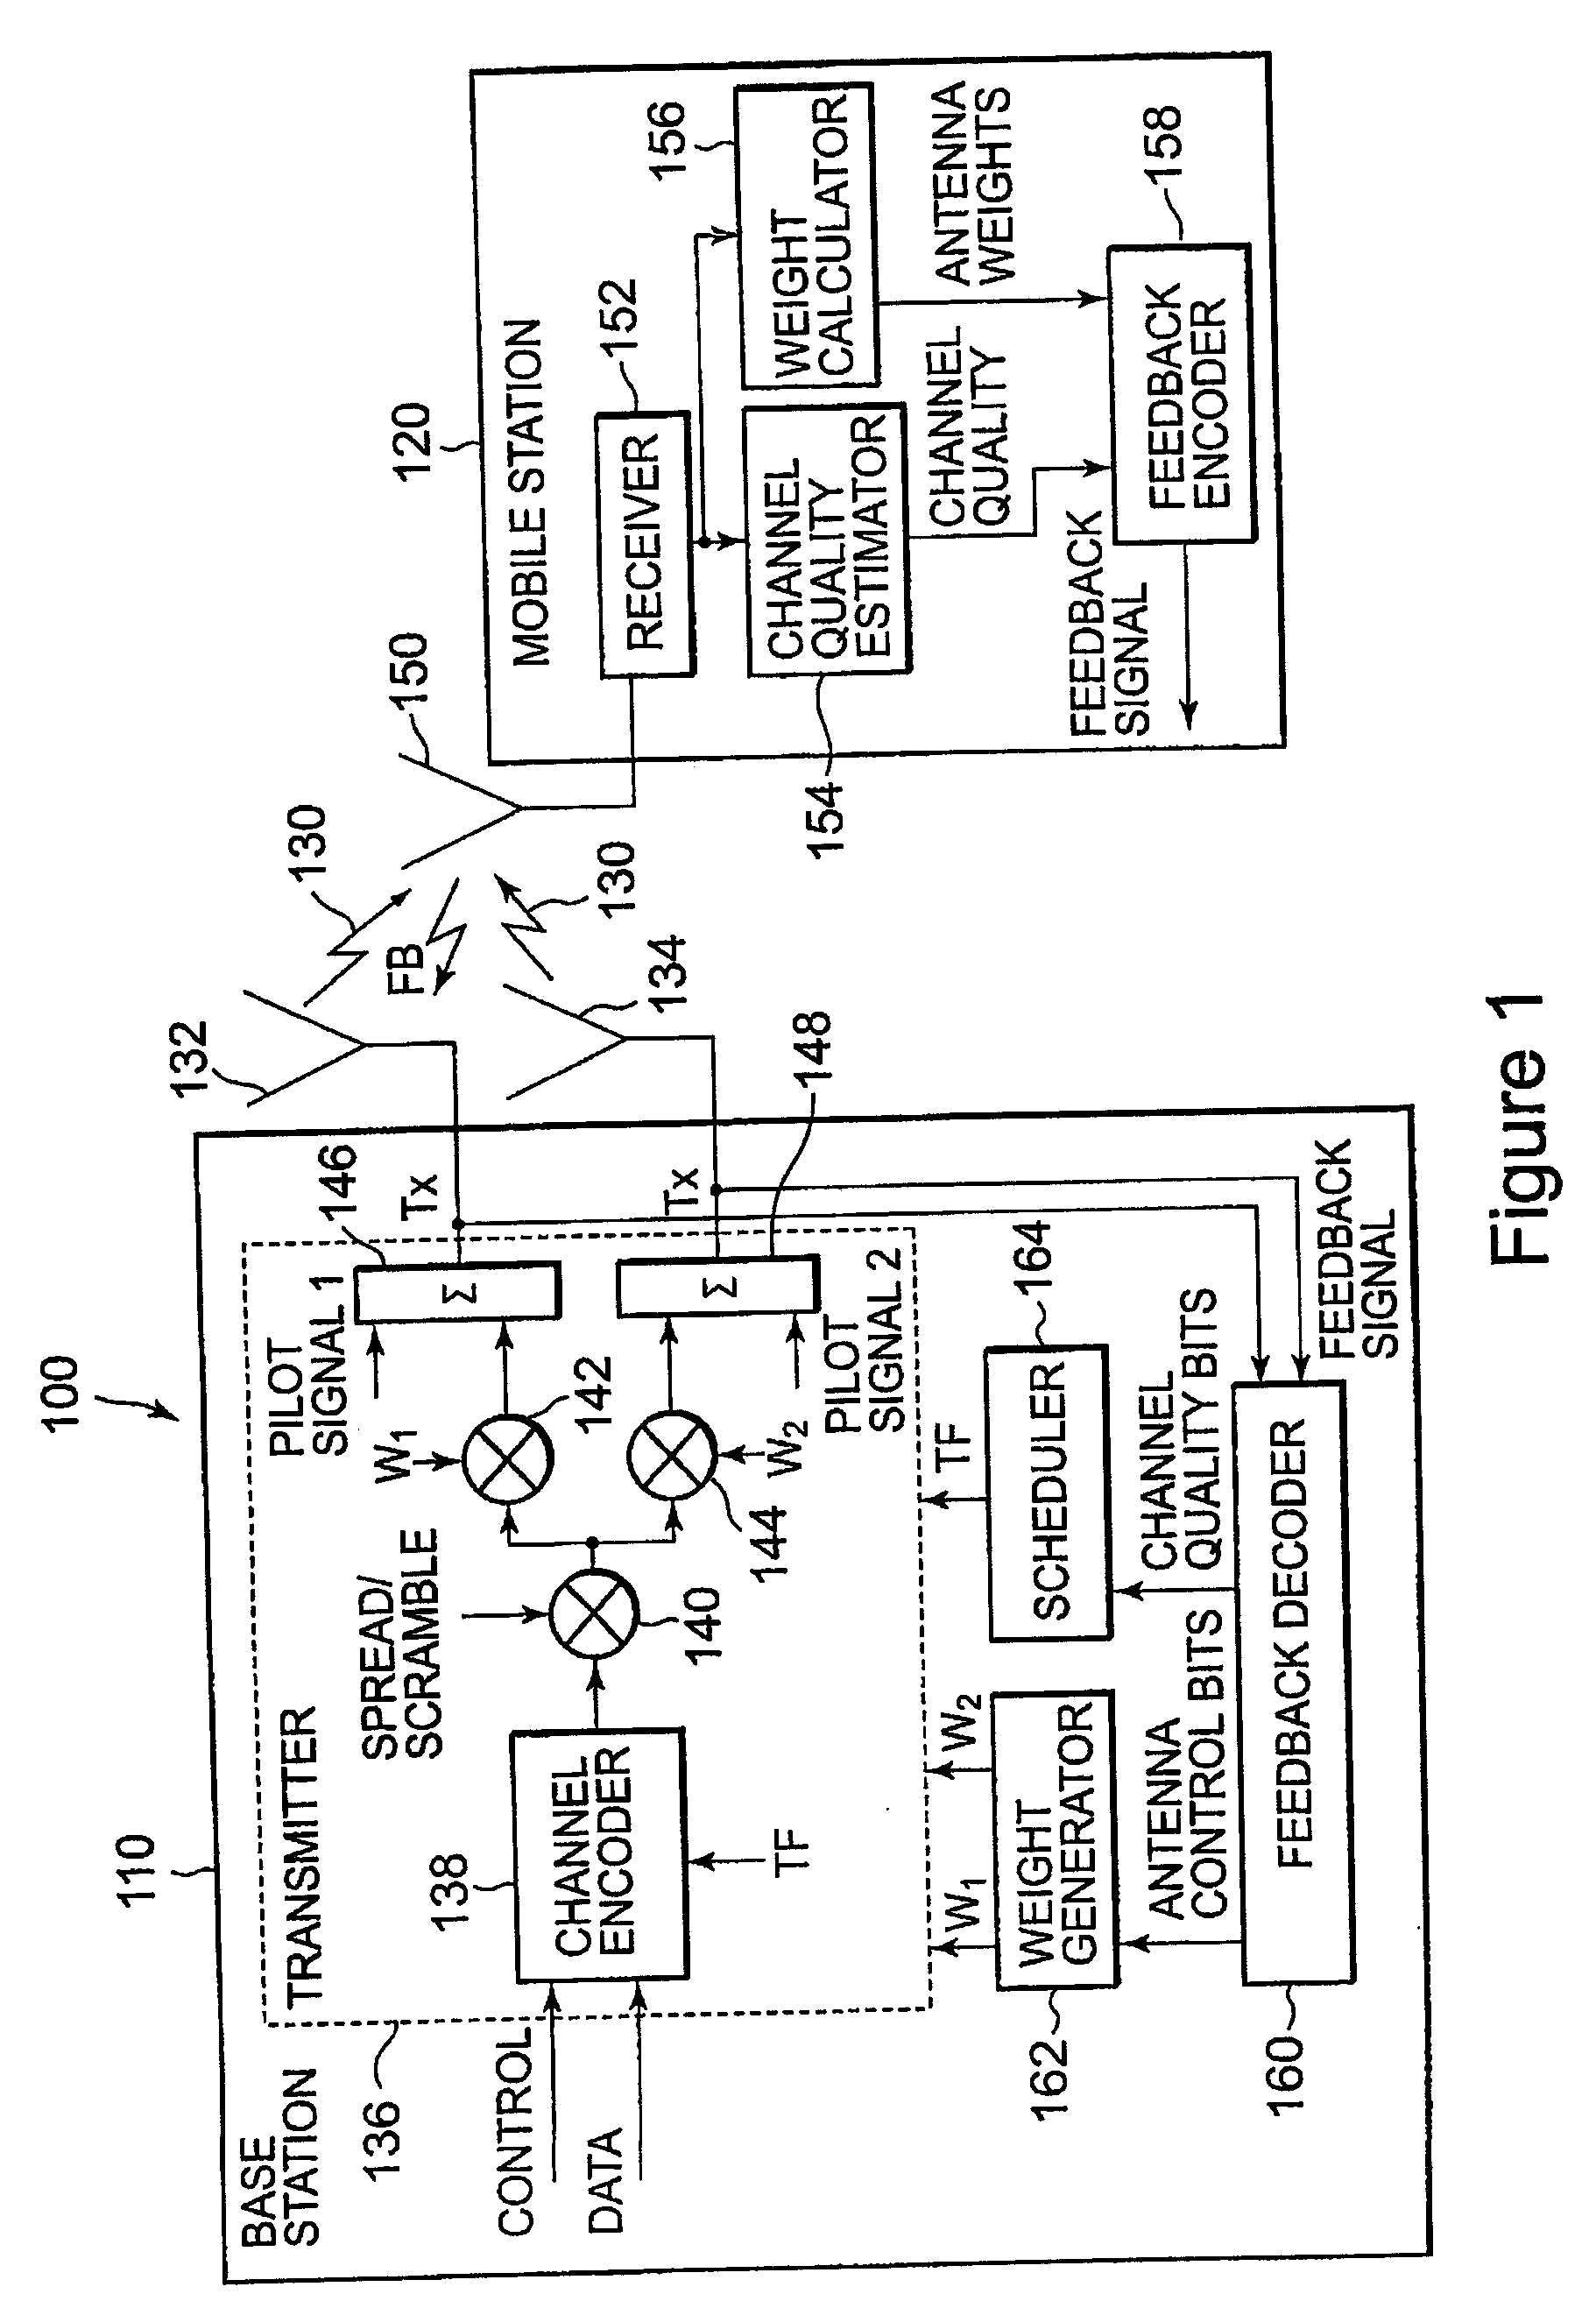 Method of measuring transmit quality in a closed loop diversity communication system